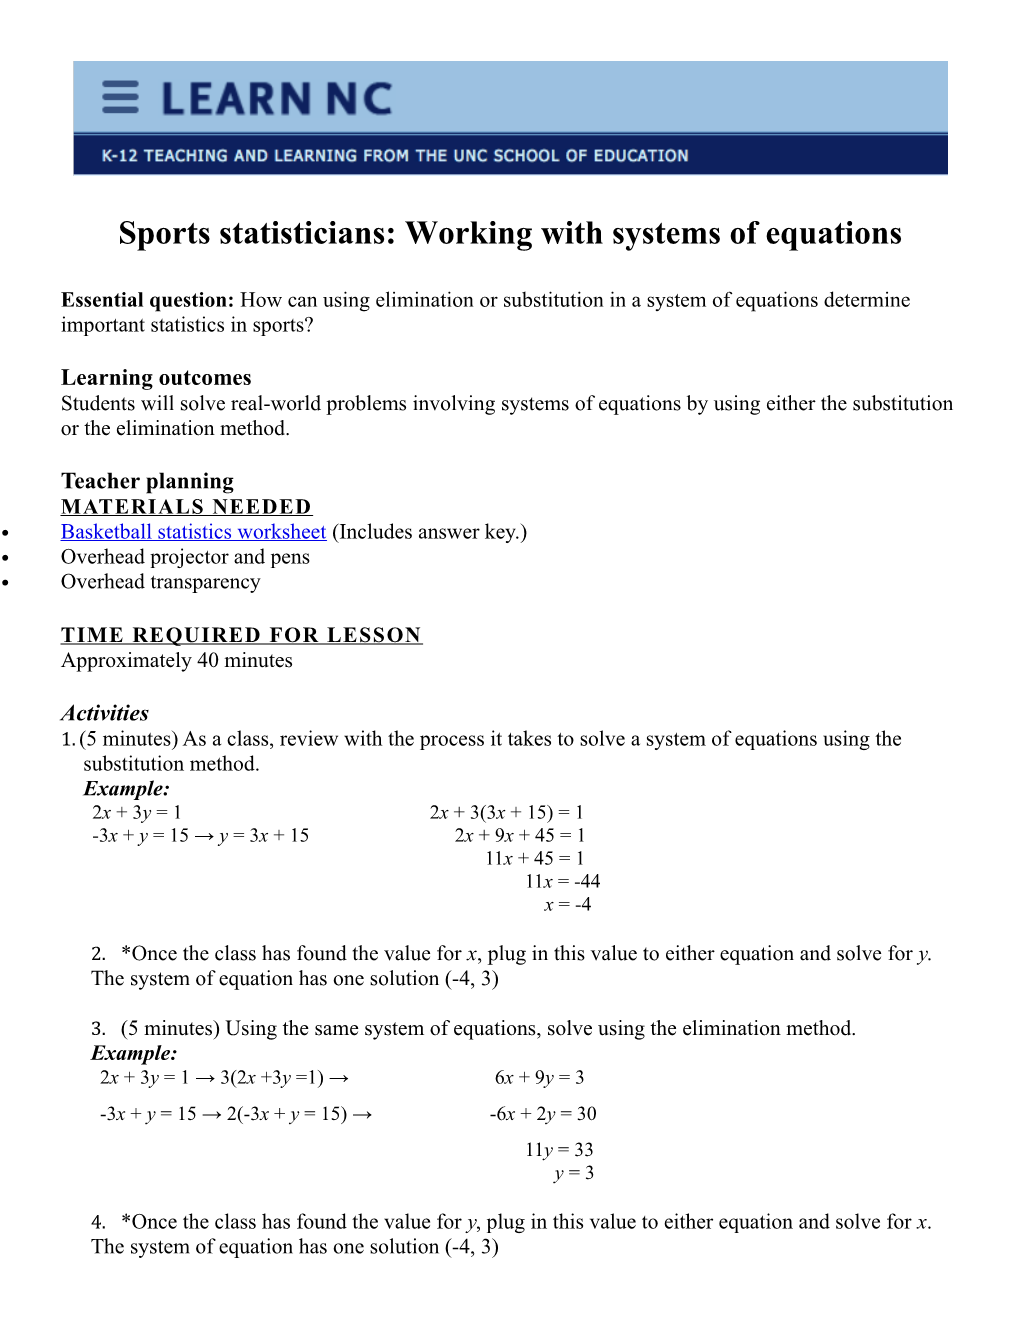 Sports Statisticians: Working with Systems of Equations